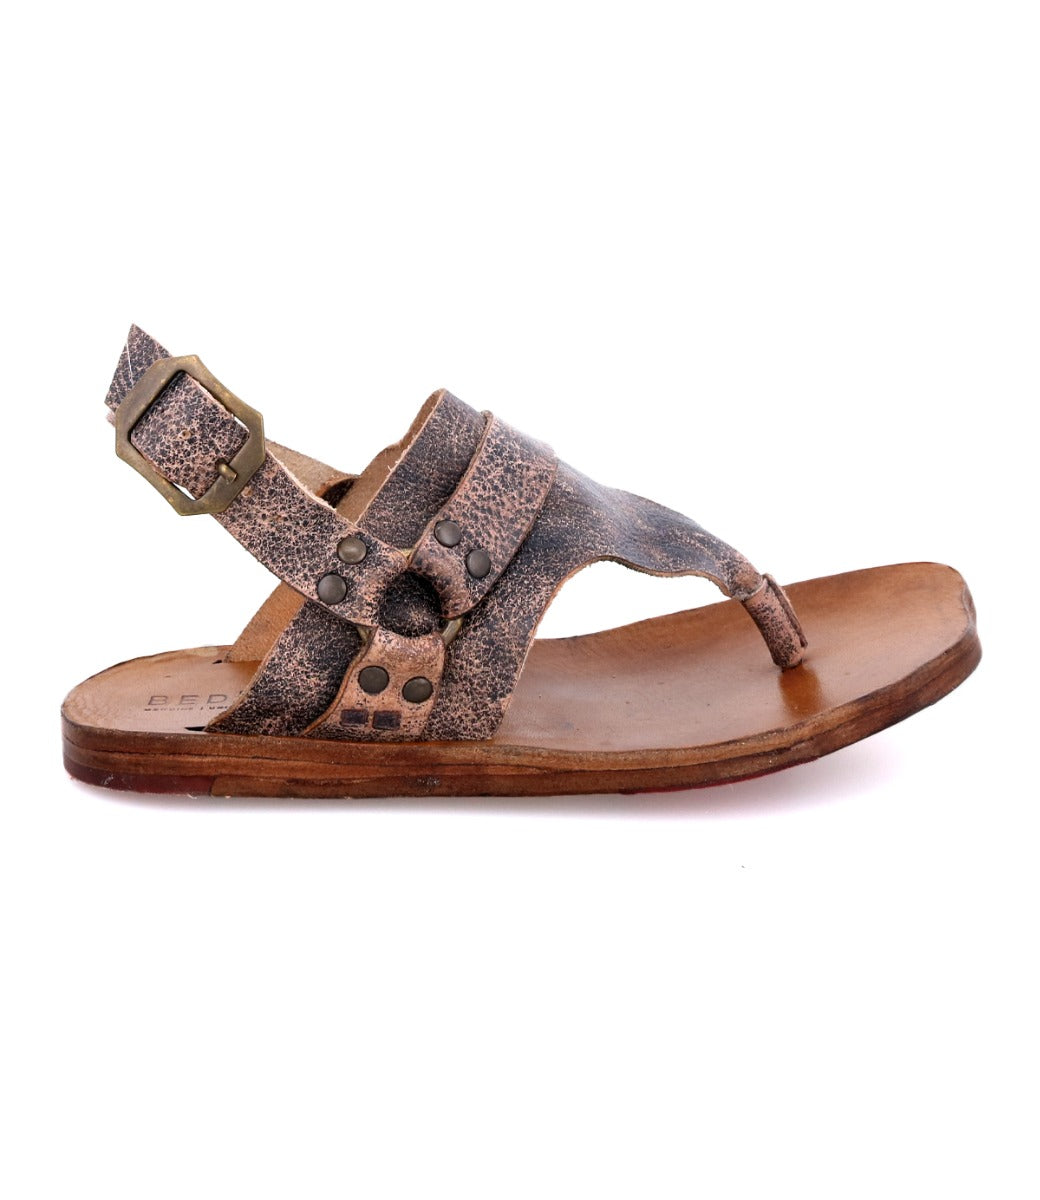 A women's black leather Callista sandal by Bed Stu with buckles and straps.